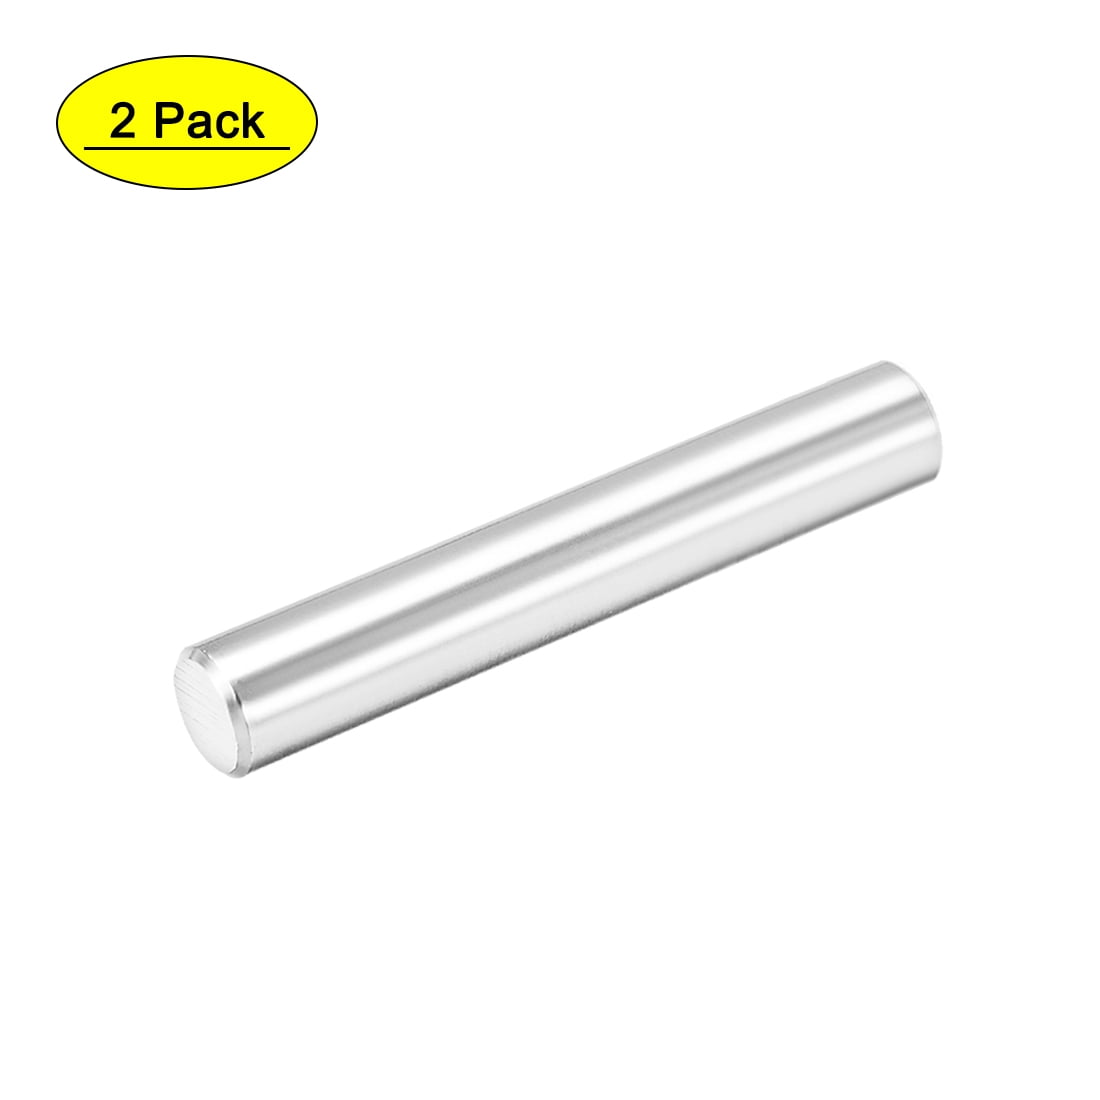 Stainless Steel Smooth Dowel 25pcs. 3/8" x 4" Long, 